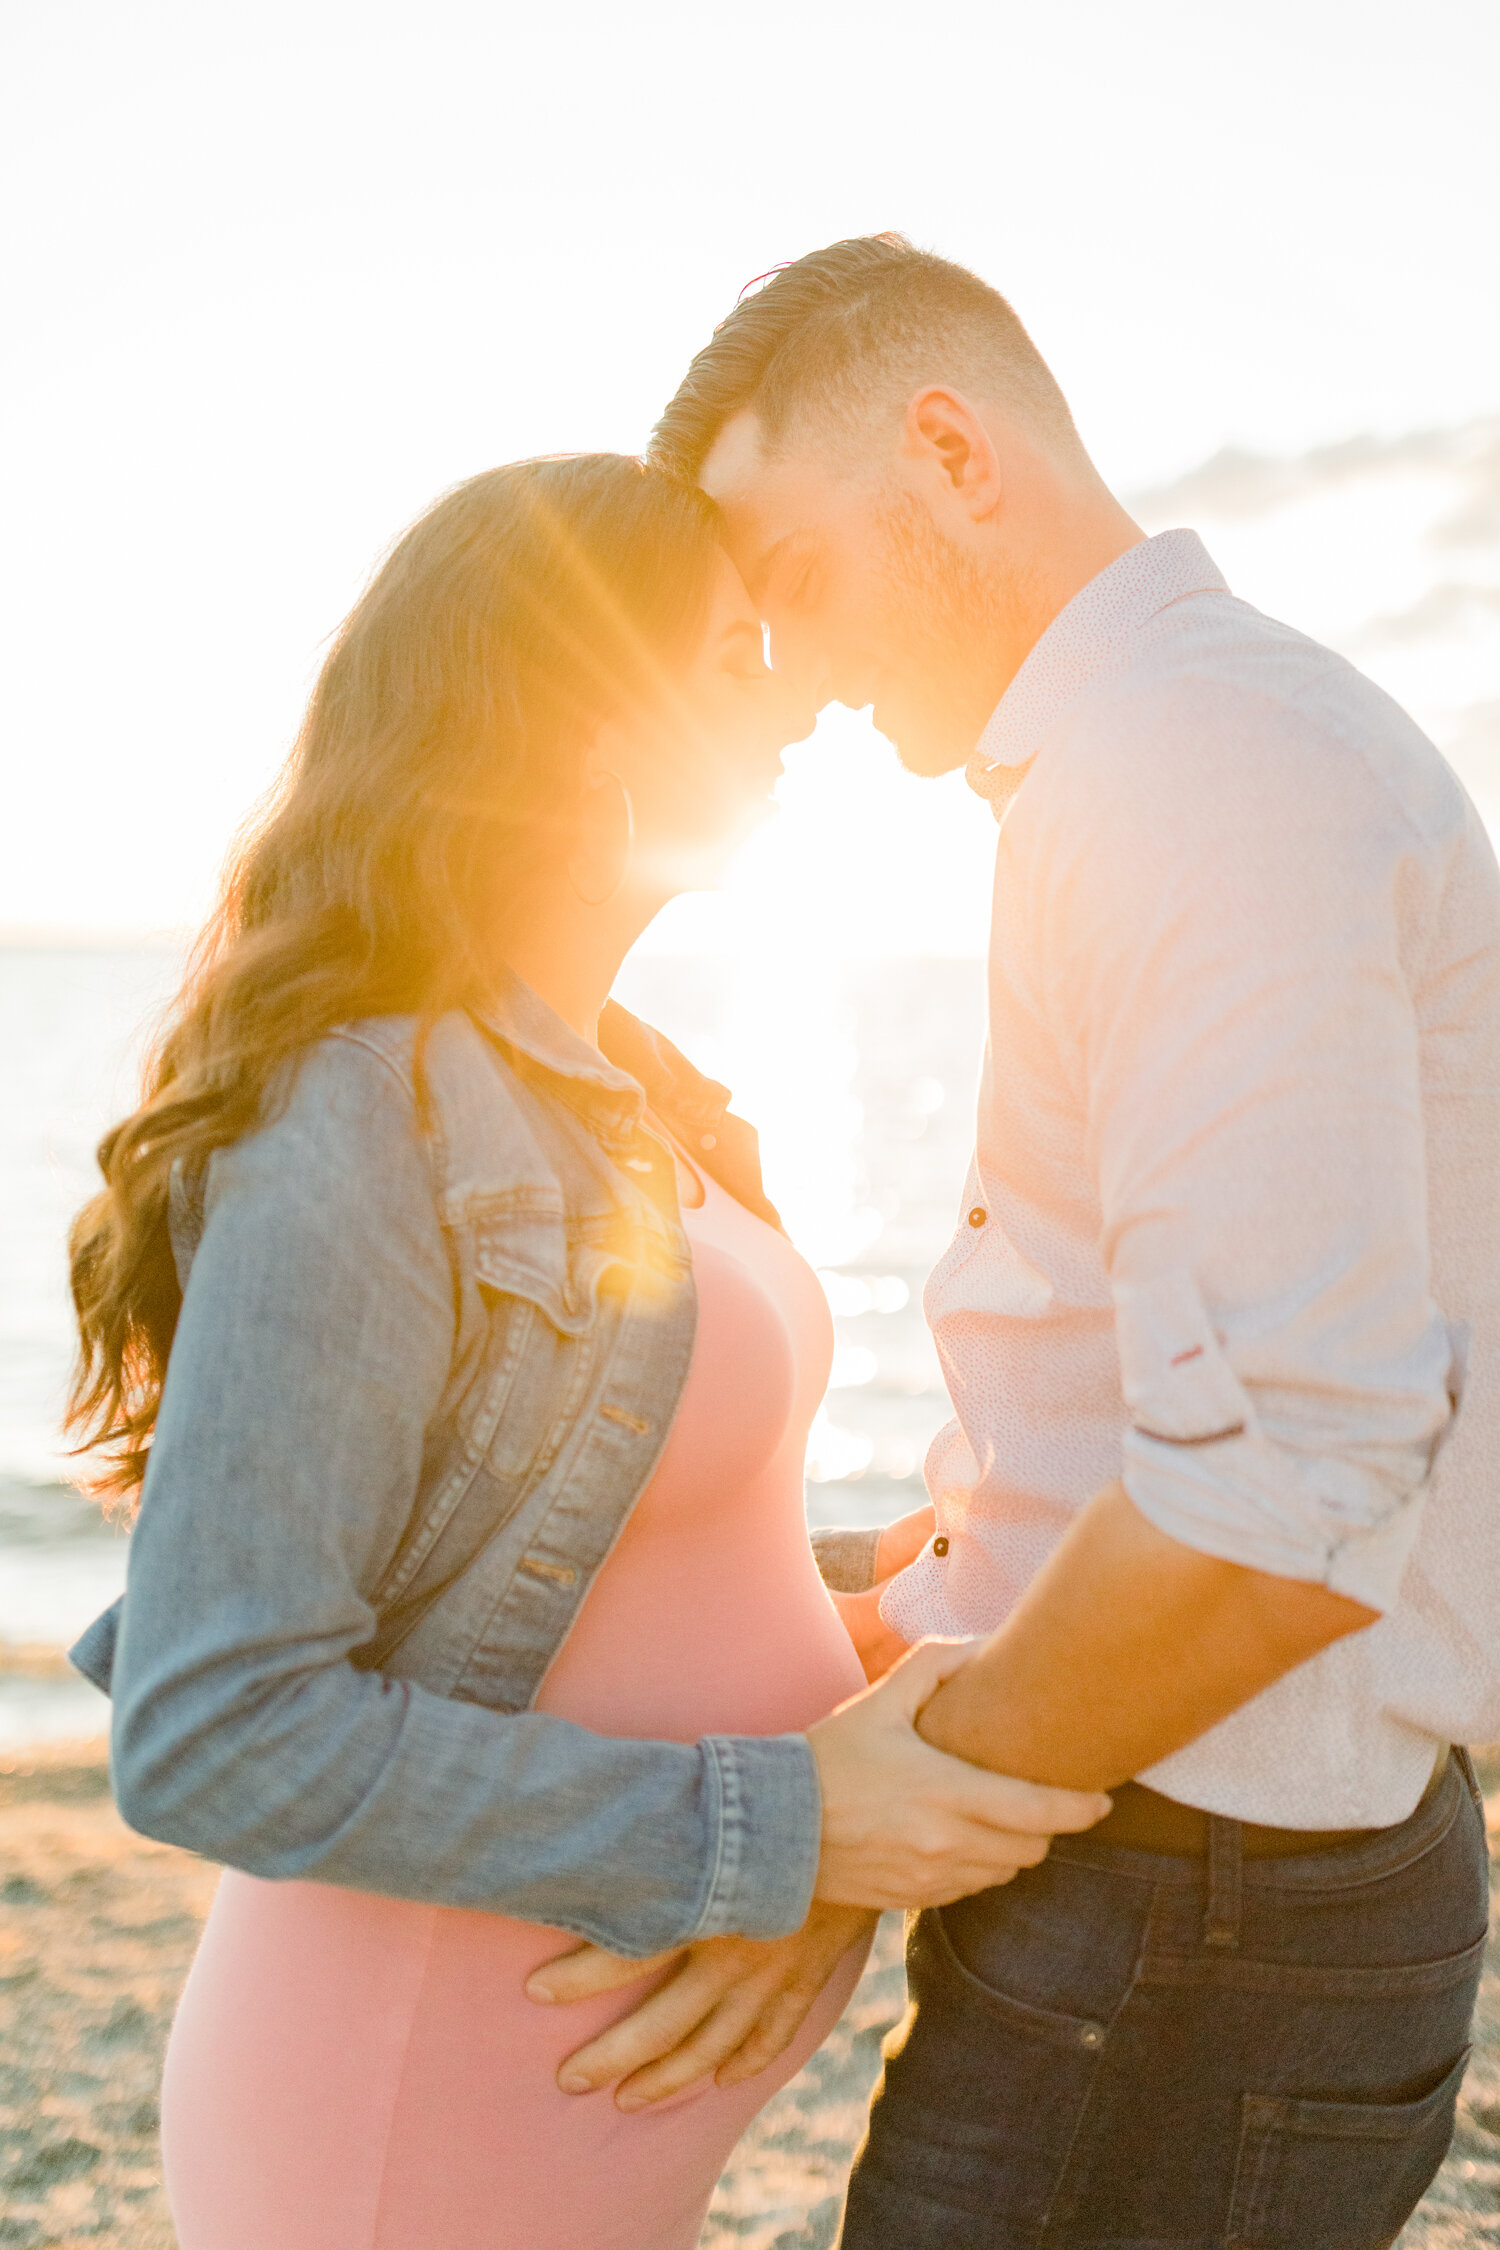  With the setting sun beaming behind them, Chelsea Mason Photography captures this expectant couple embracing along the beach in Ottawa, Canada. expectant father holding wife’s stomach, fitted maternity pink dress, brittania beach ottawa canada mater